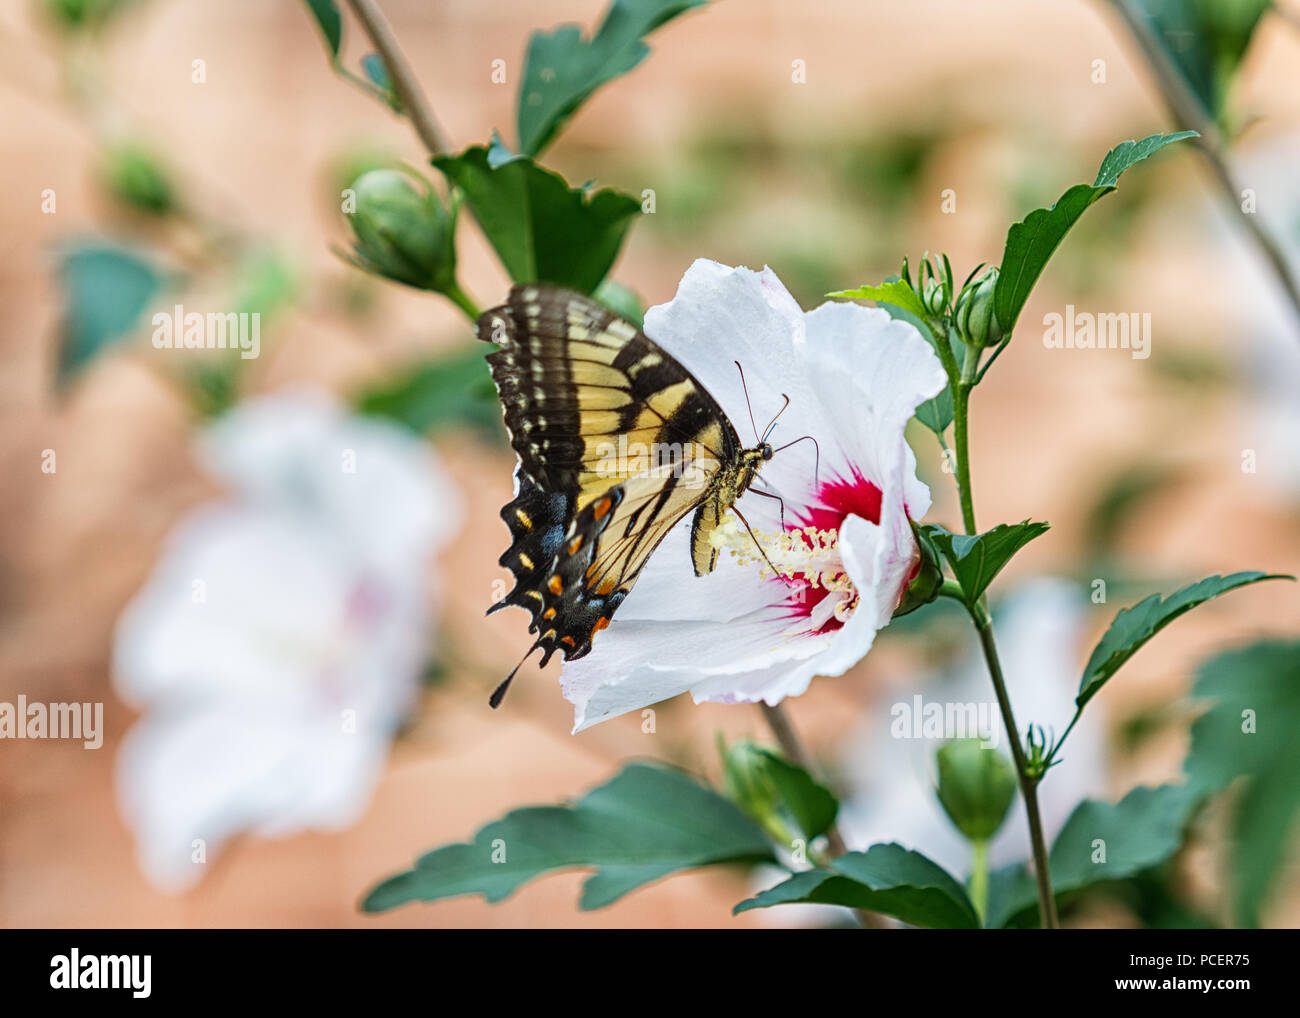 Eastern Tiger Swallowtail Butterfly on a Rose of Sharon flower. Stock Photo